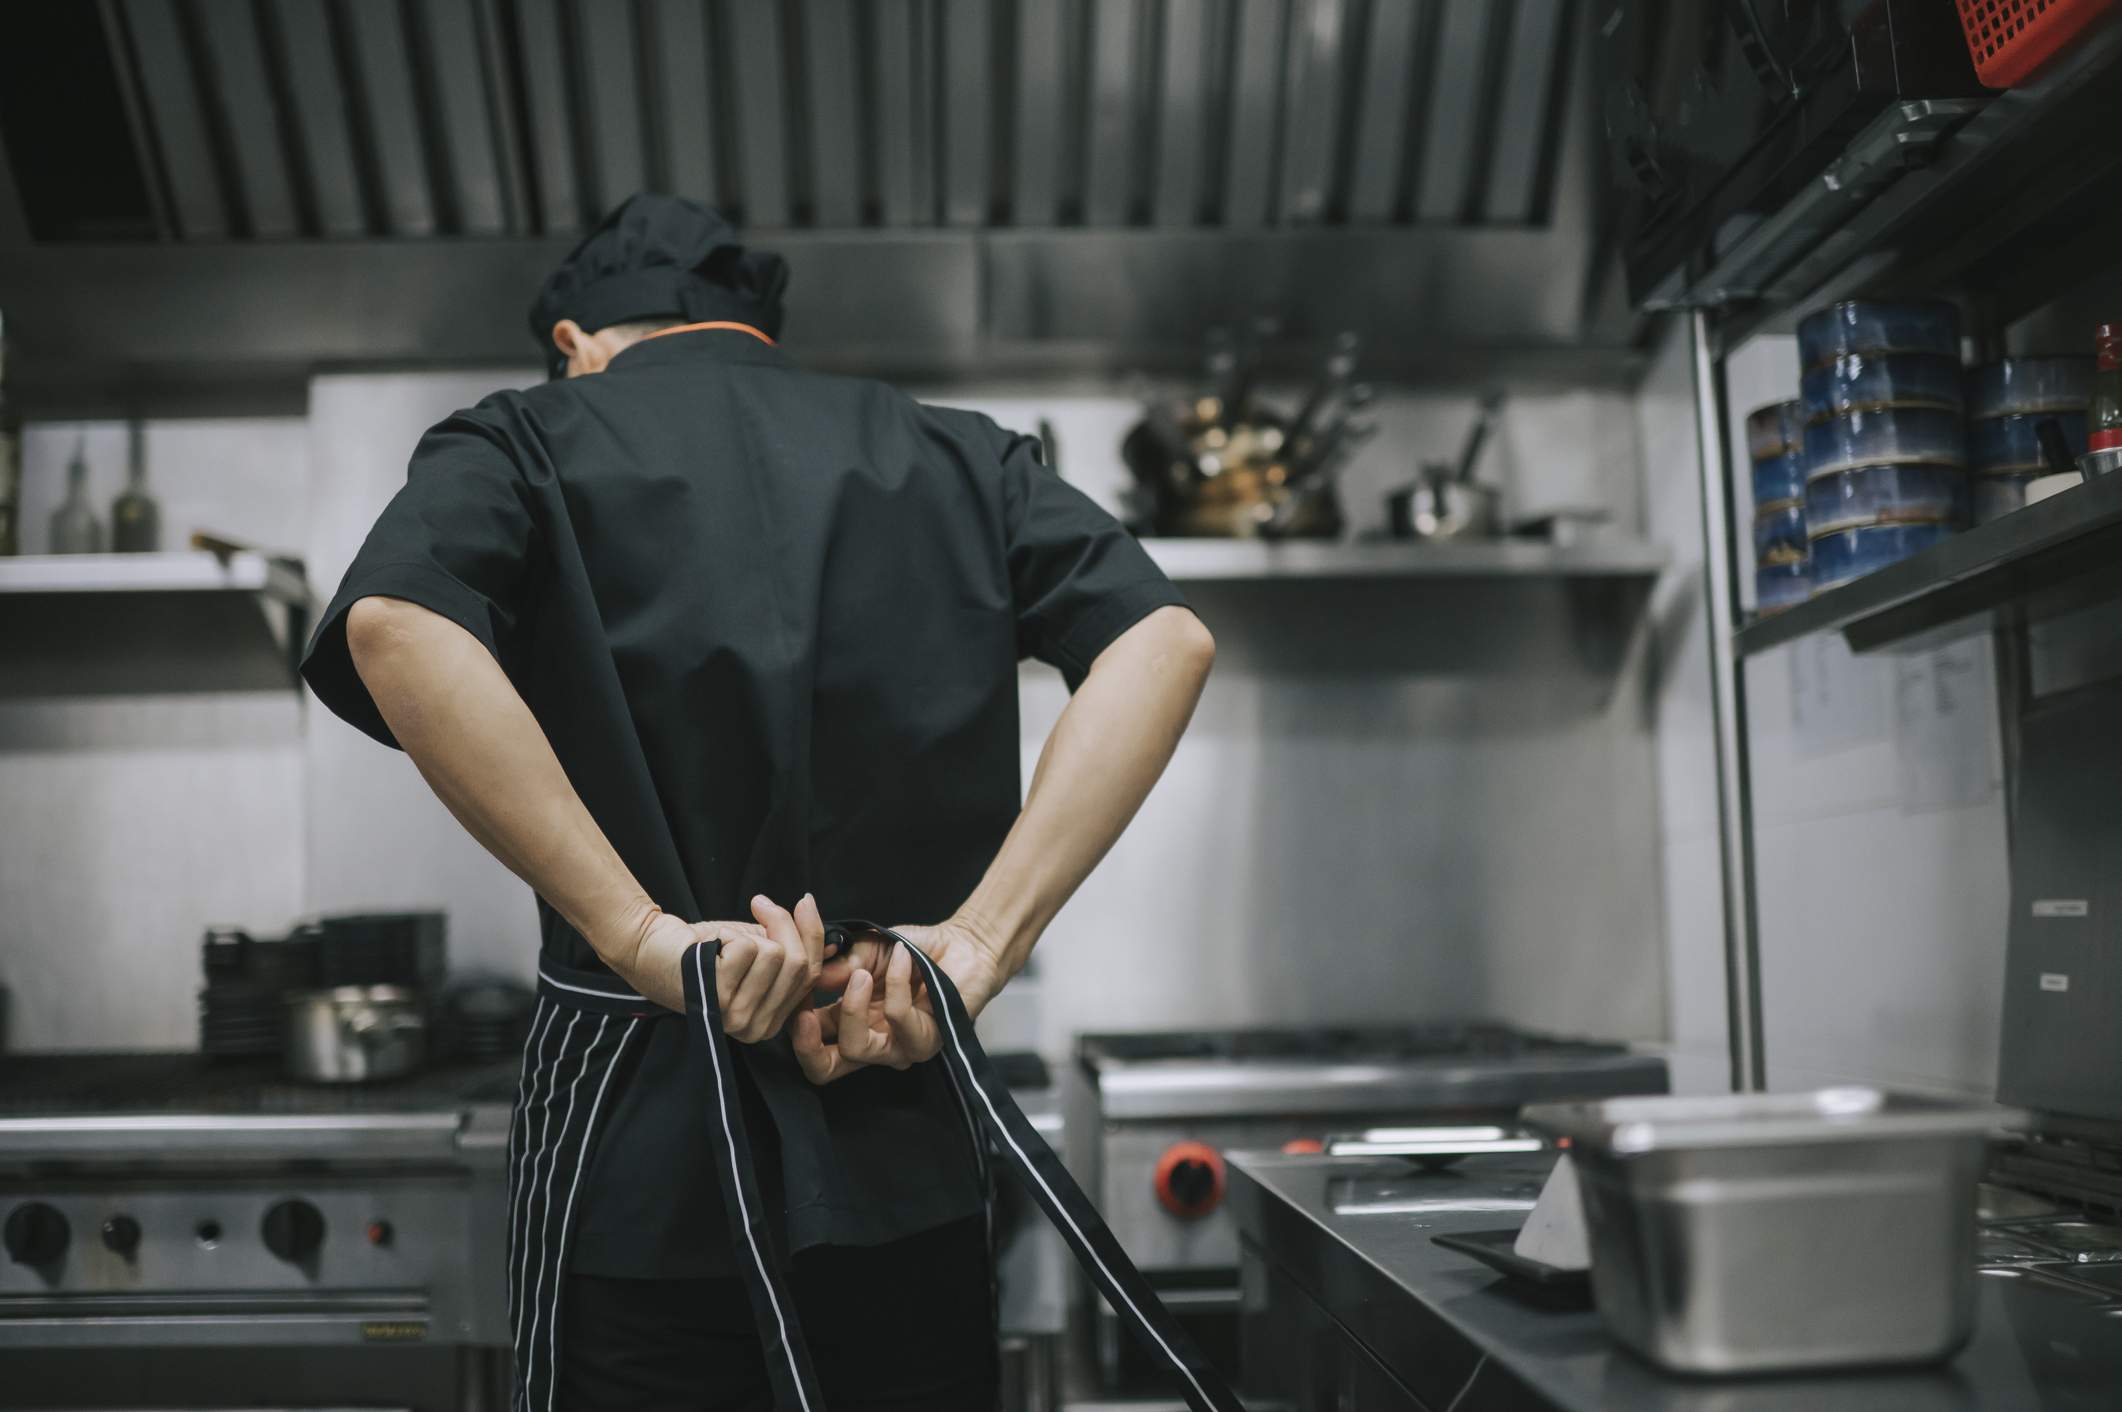 Image depicts a restaurant worker tying an apron behind their back. 